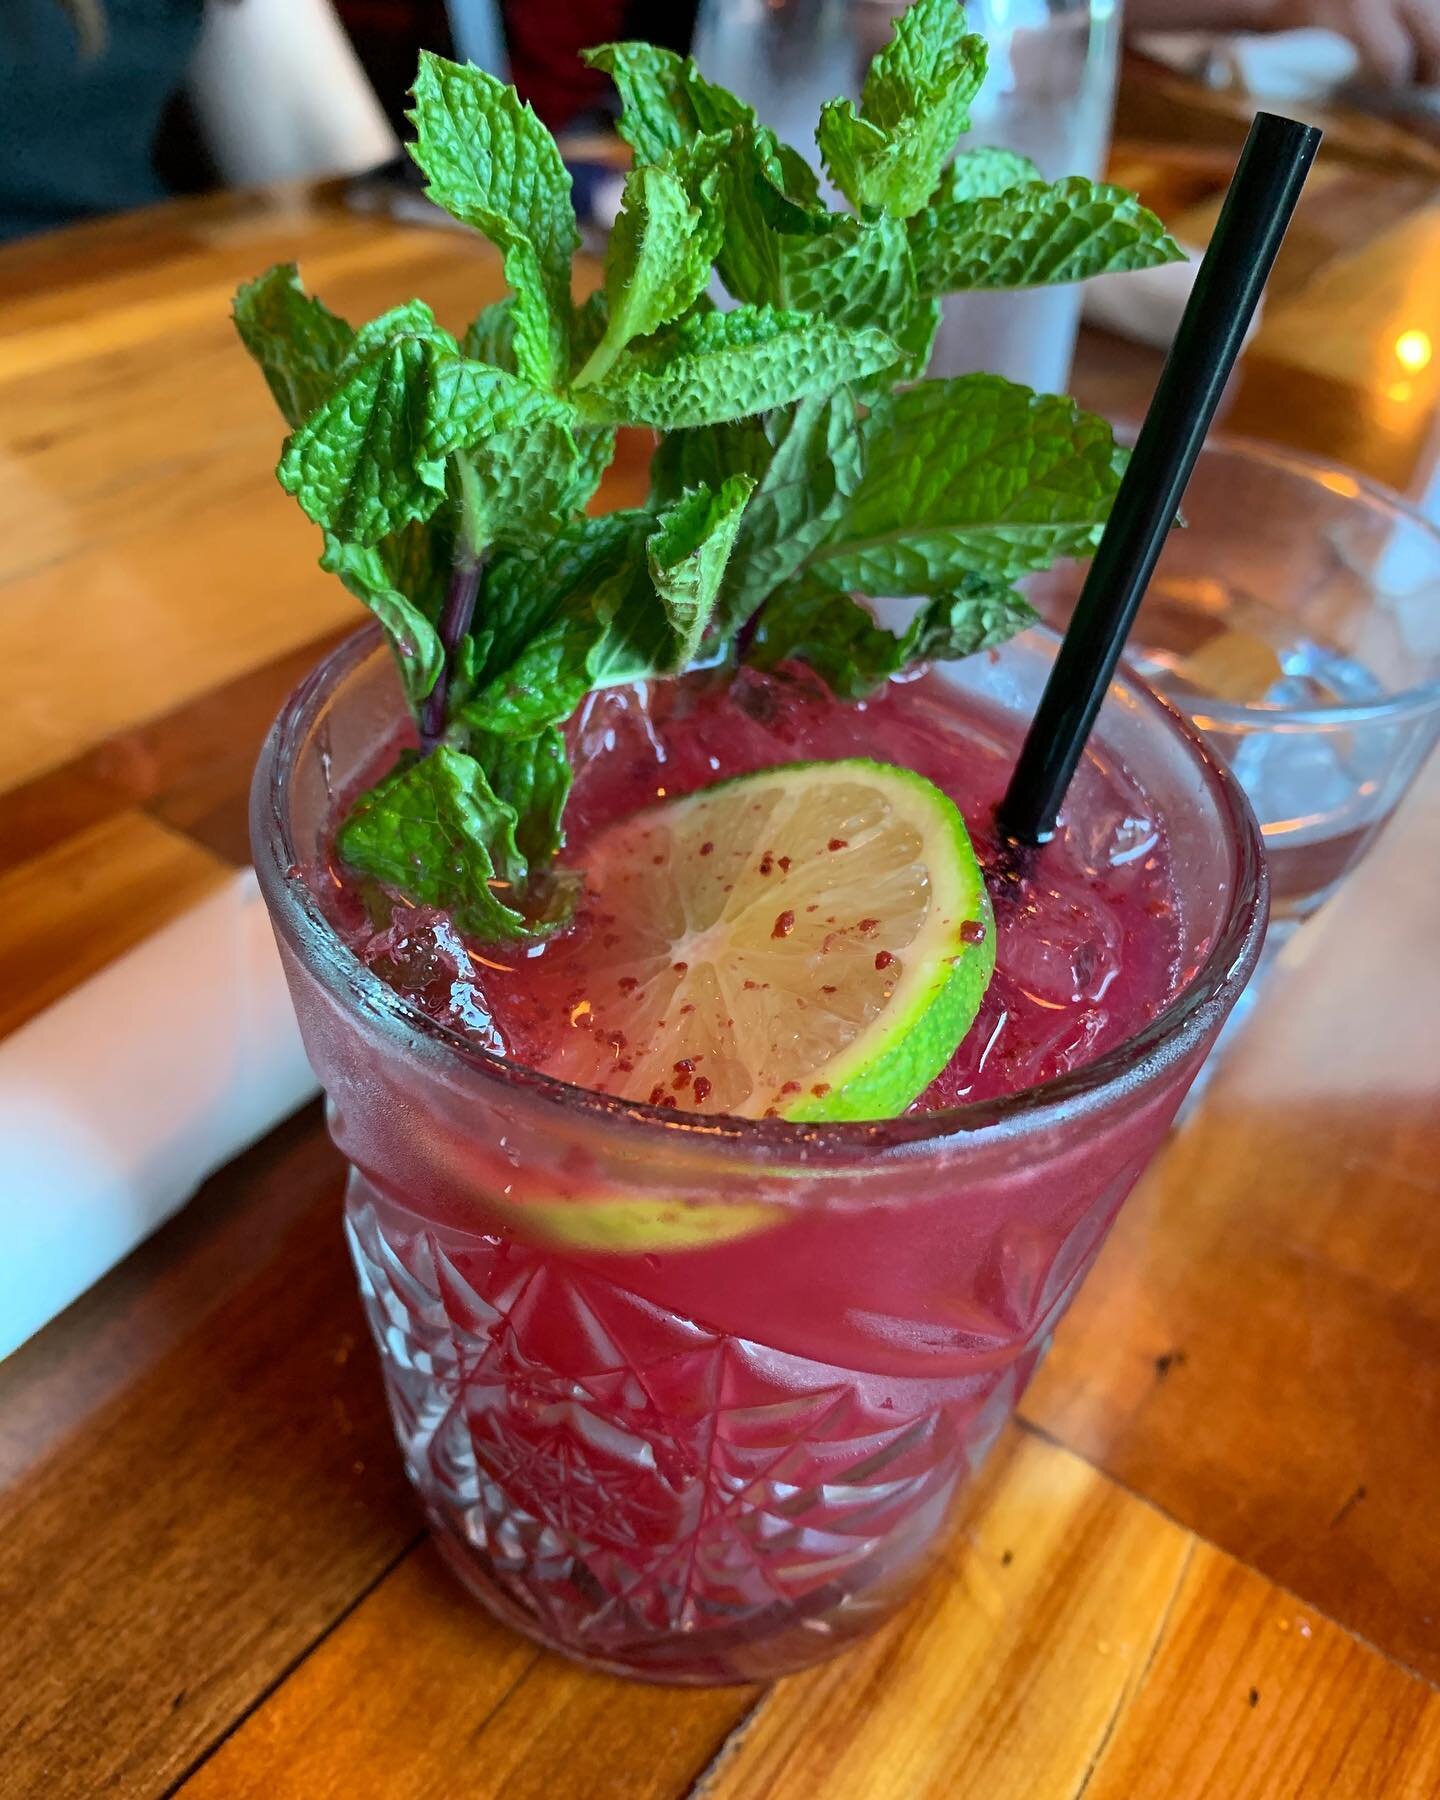 Mojito but mix it up 🌀 Mixed Berry Mojito
#ThePlaceAthens
#AthensGA 
#CraftedCocktails